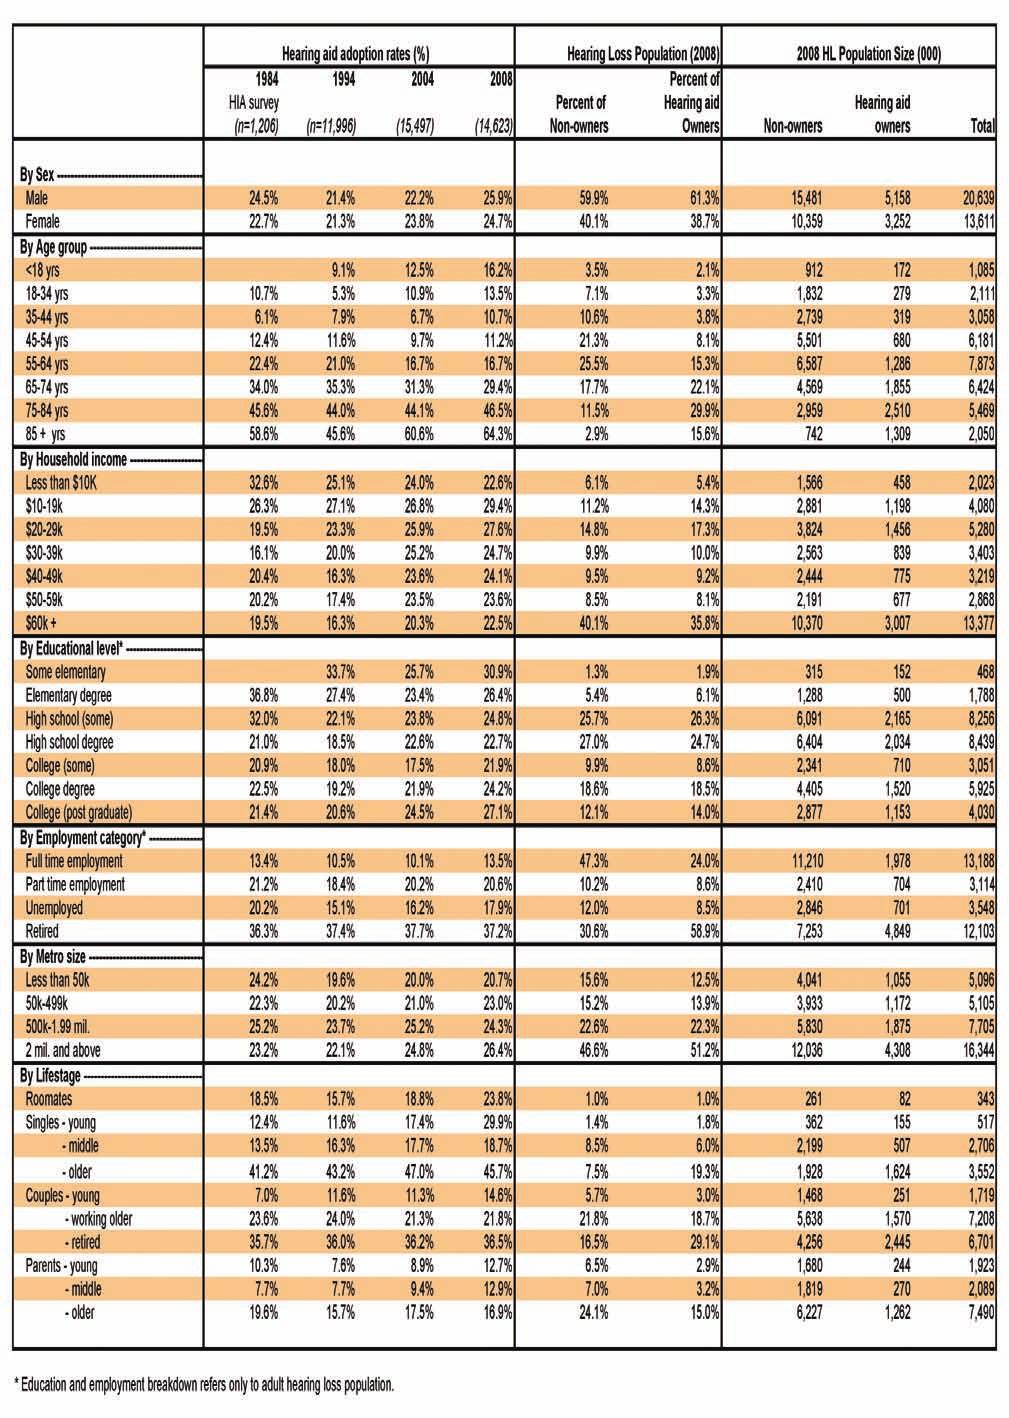 TABLE 5. Hearing aid adoption rates and populations by selected demography.